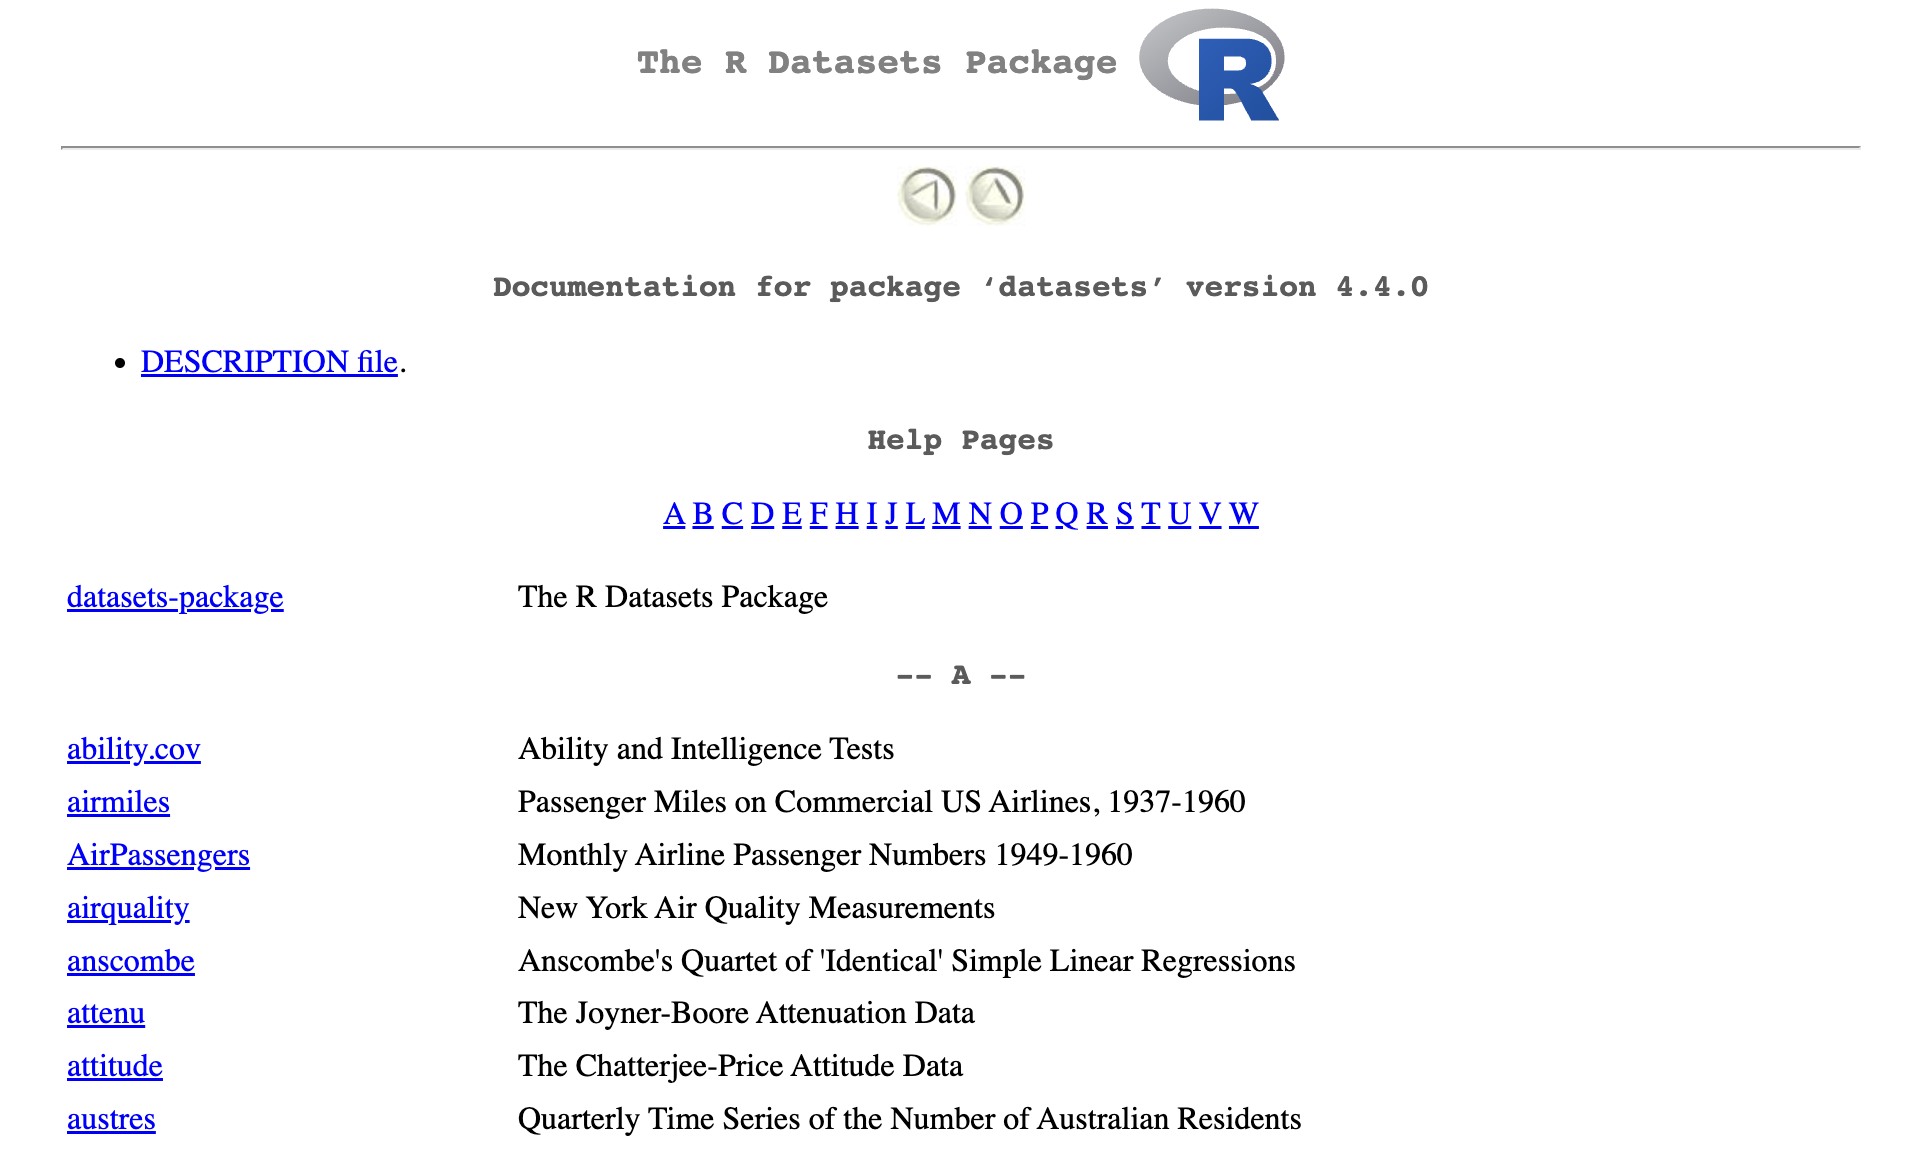 The page displaying the list of datasets from the "Datasets" R package